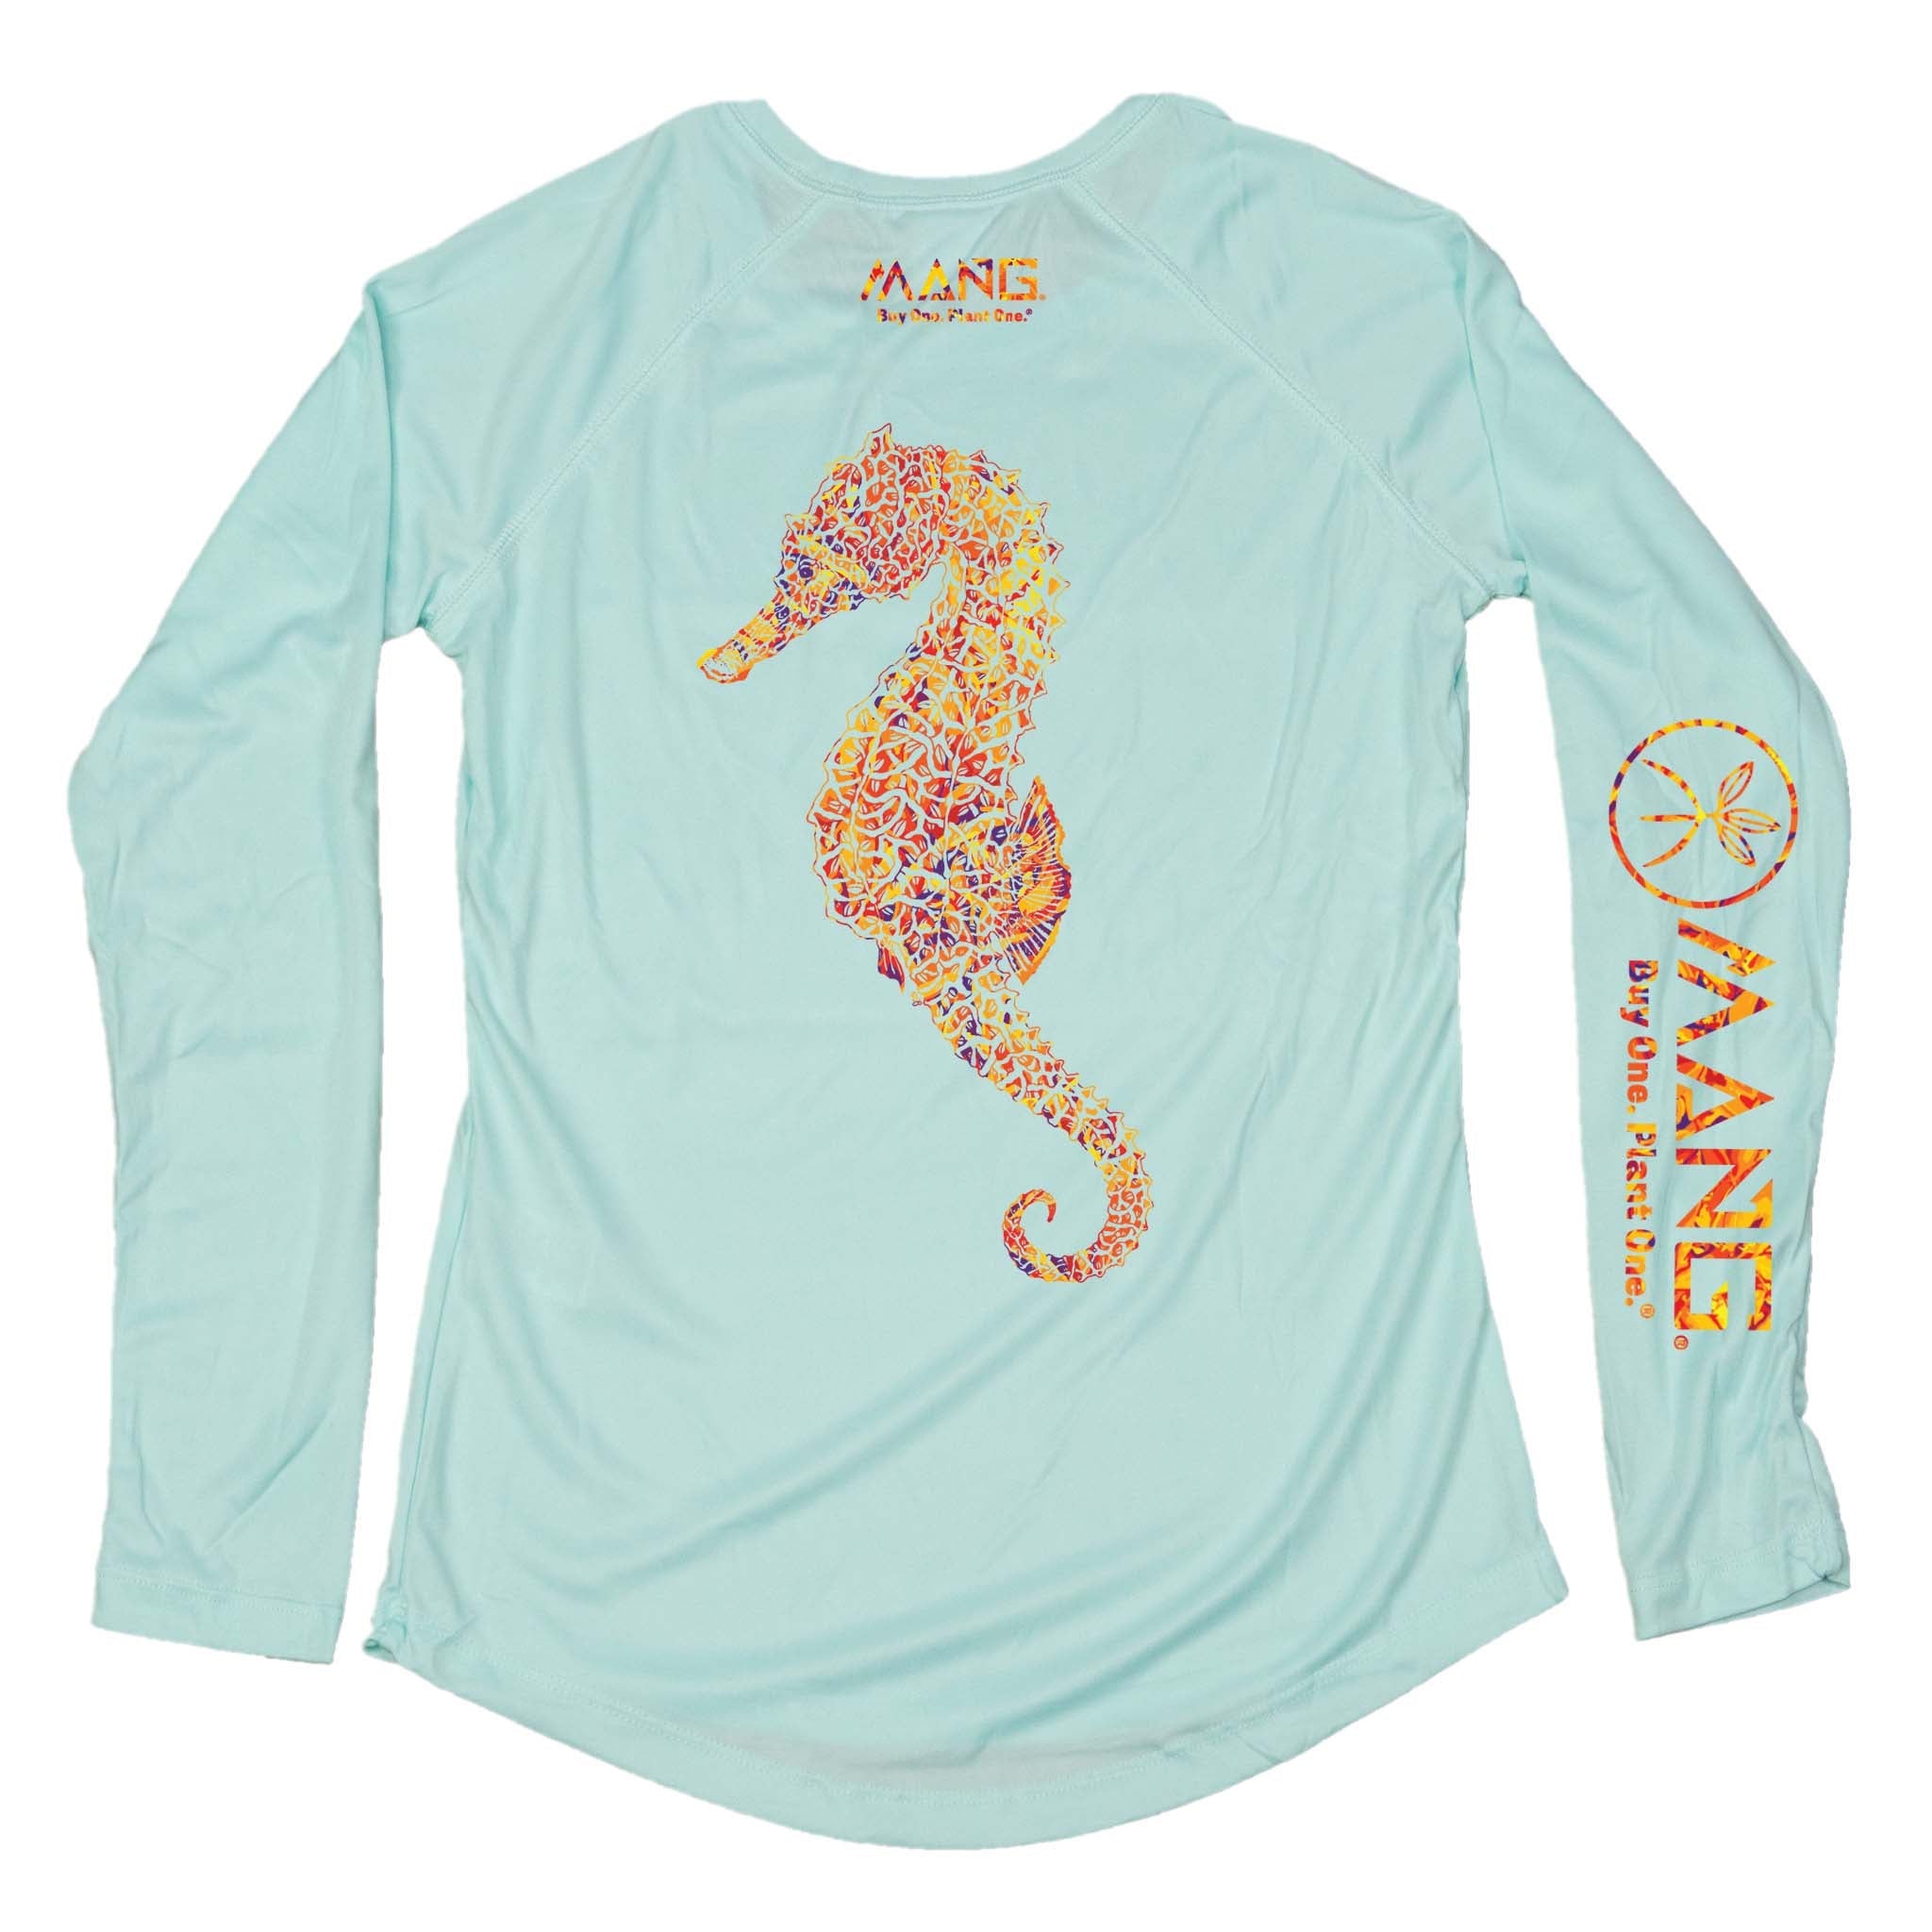 Mang Womens Performance LS Lycra Seahorse Seagrass M